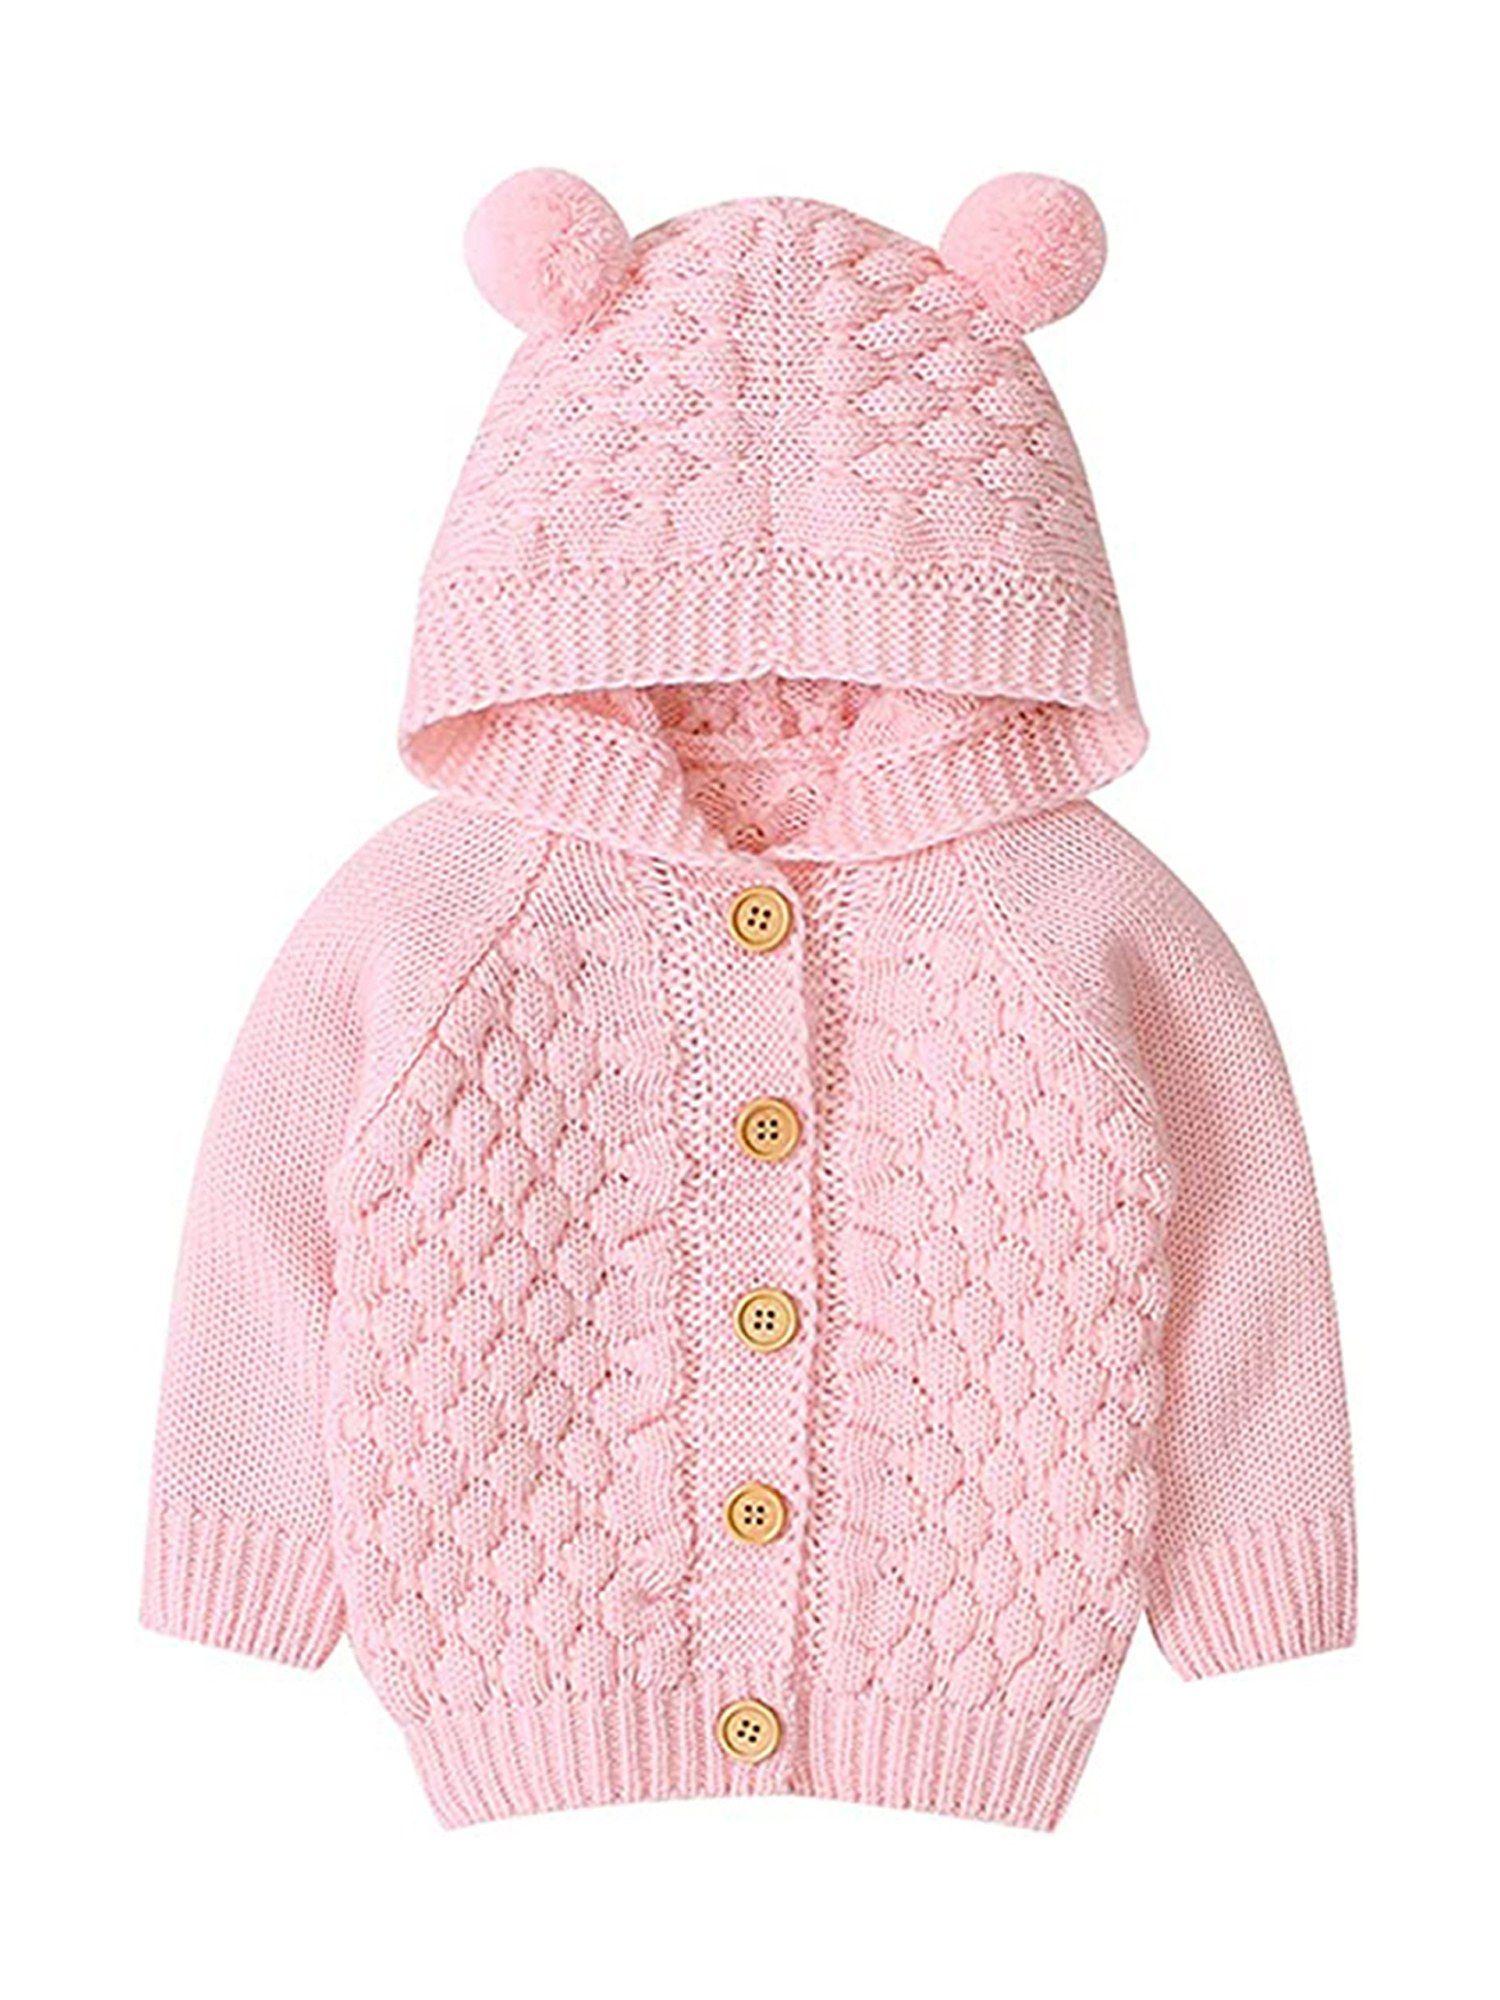 infants-baby-pink-knitted-cardigan-sweater-with-pom-pom-hoodie